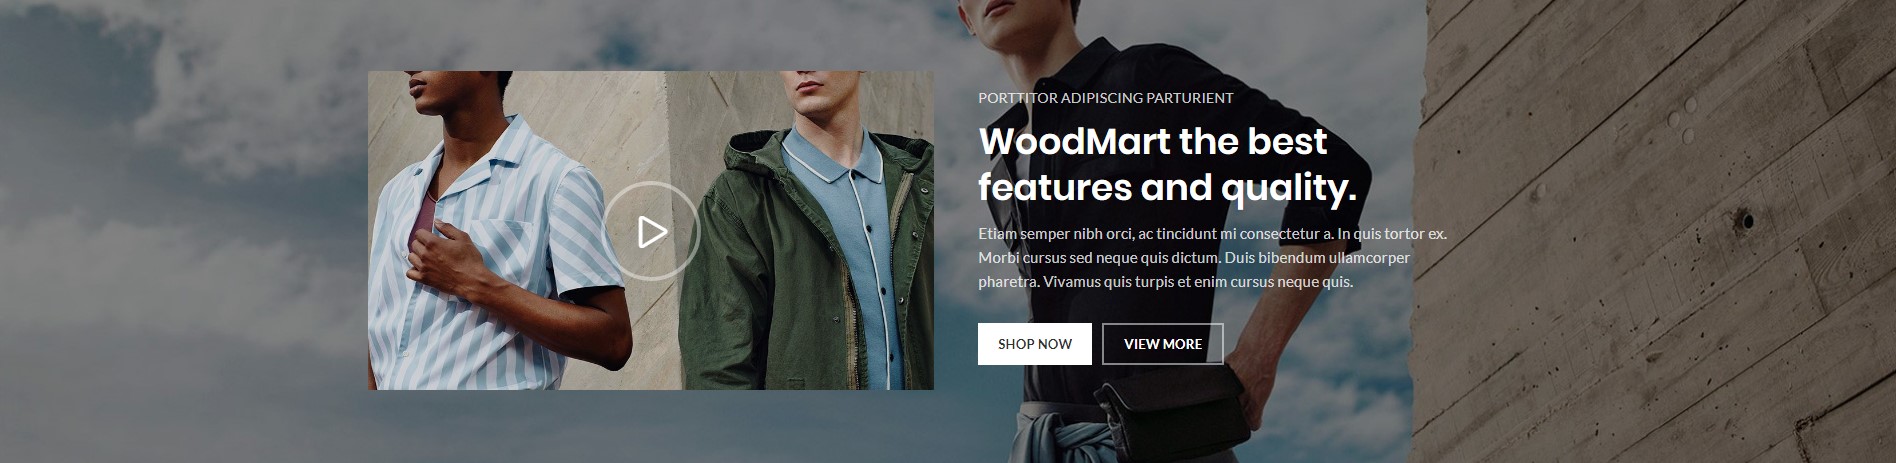 Full with image with video - WoodMart